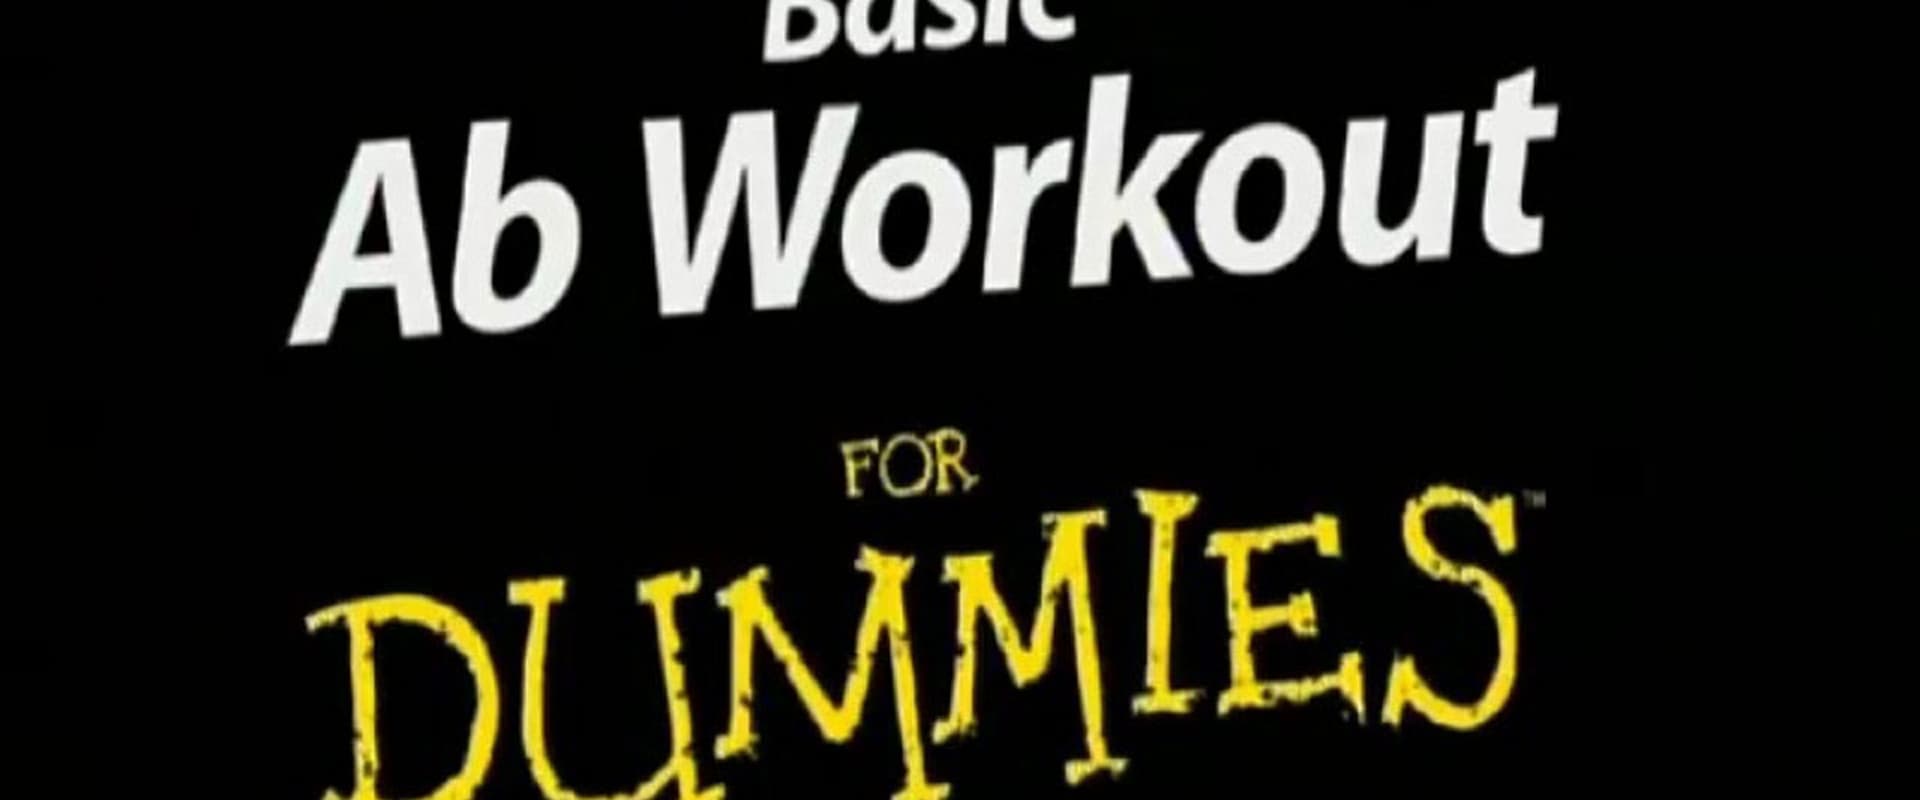 Basic Ab Workout for Dummies